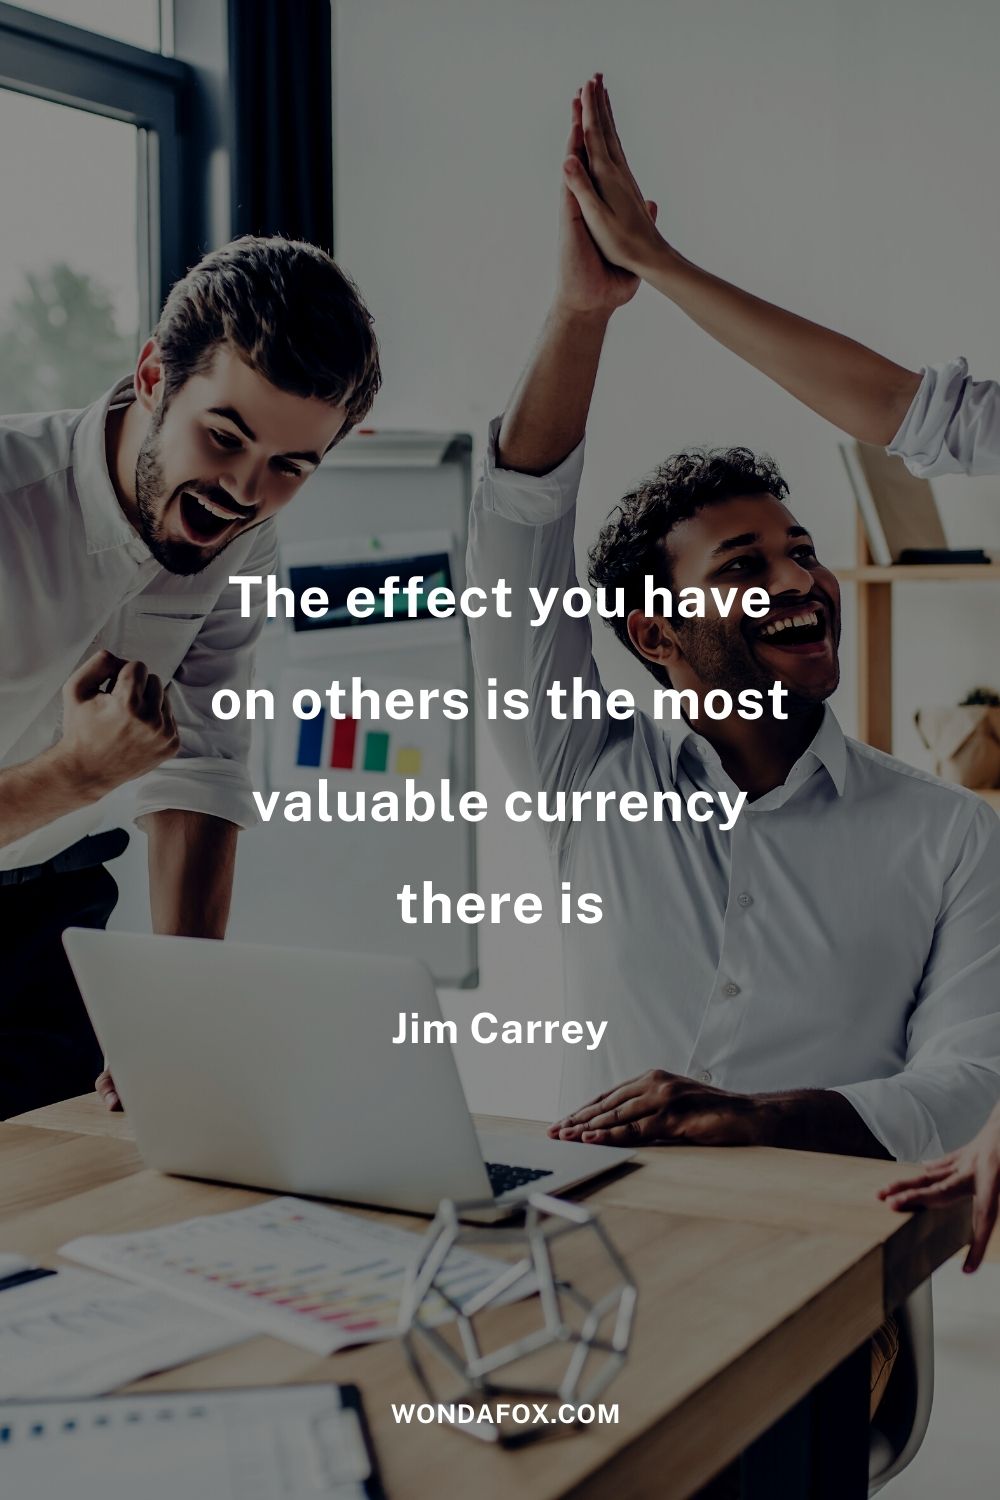 The effect you have on others is the most valuable currency there is